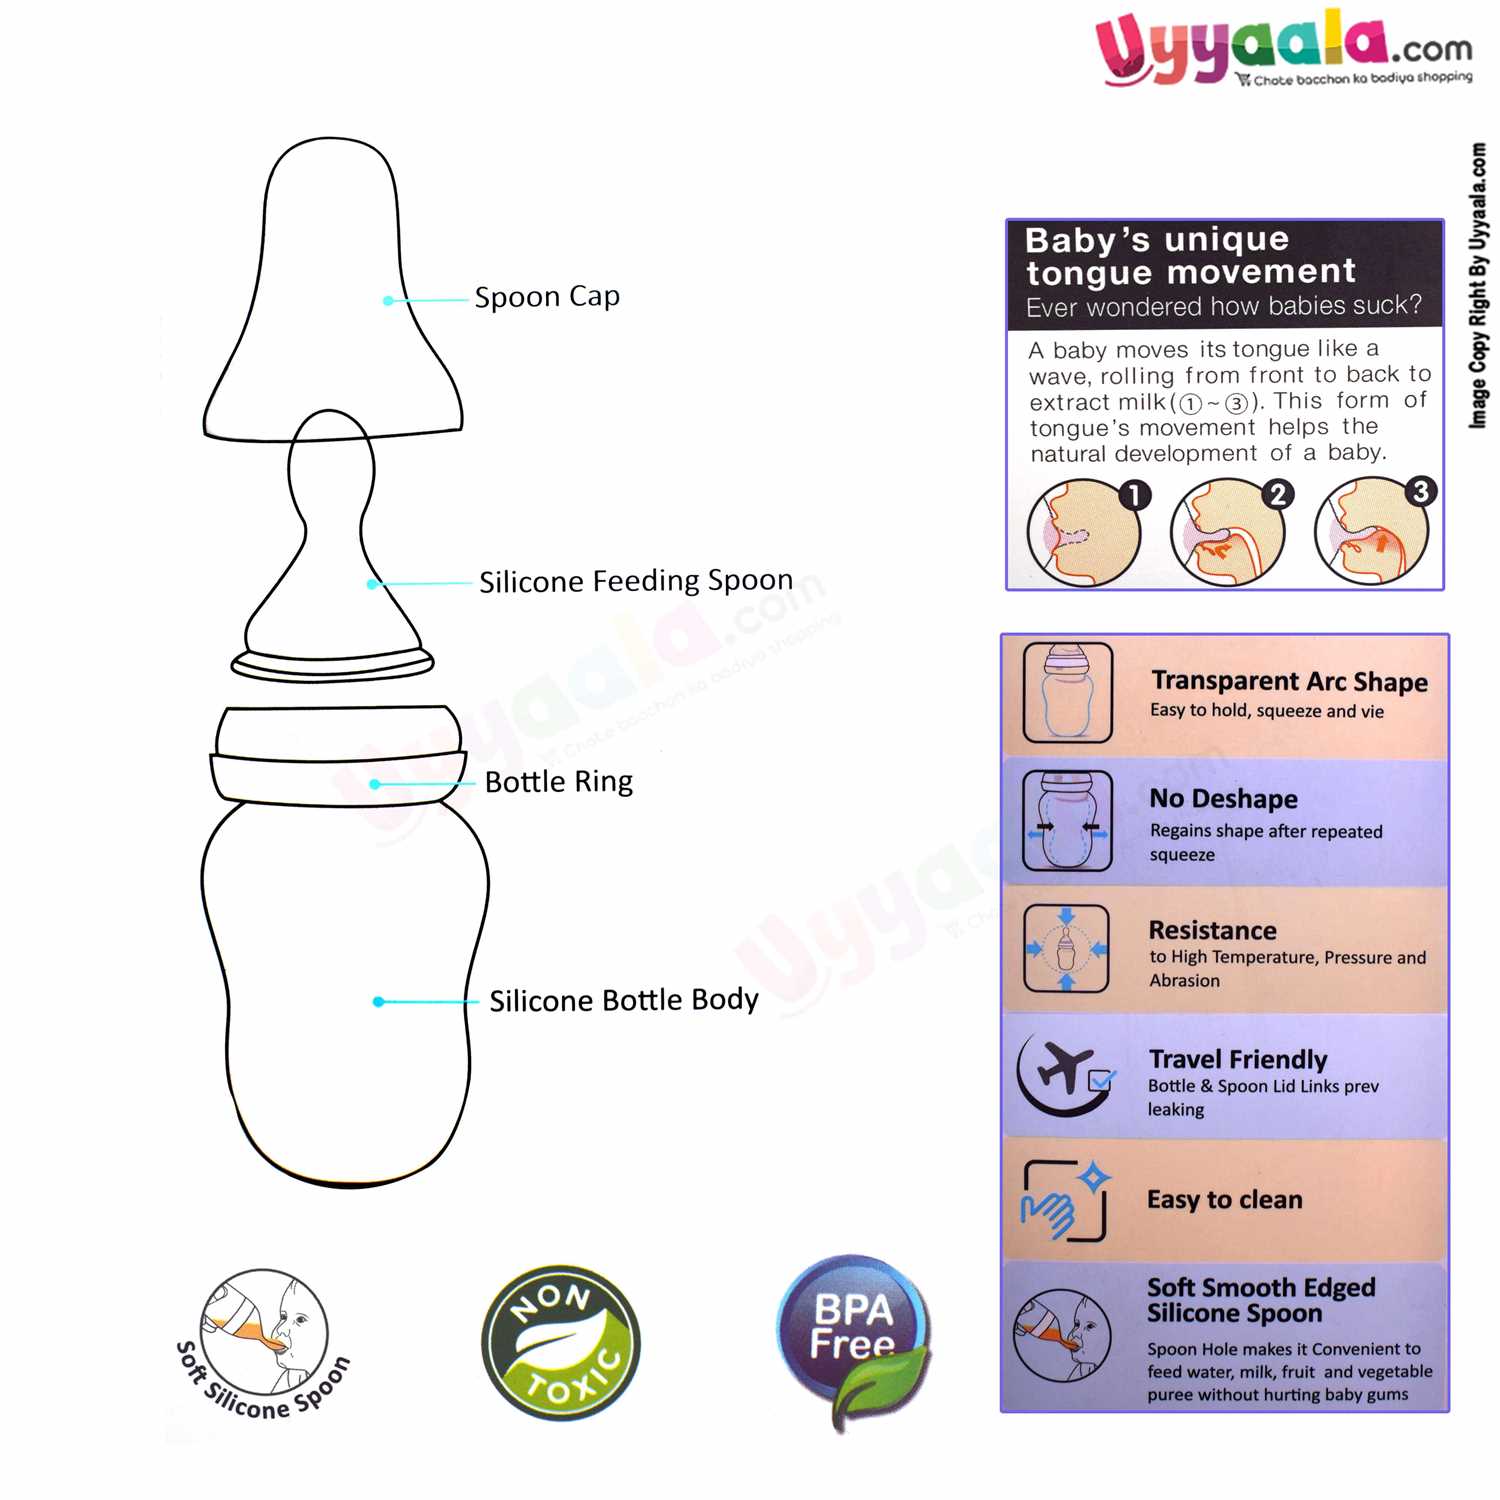 LUVLAP Squeezy Baby Bottle Feeder with Silicone Spoon Tip, 180ml, 4m+age - Yellow